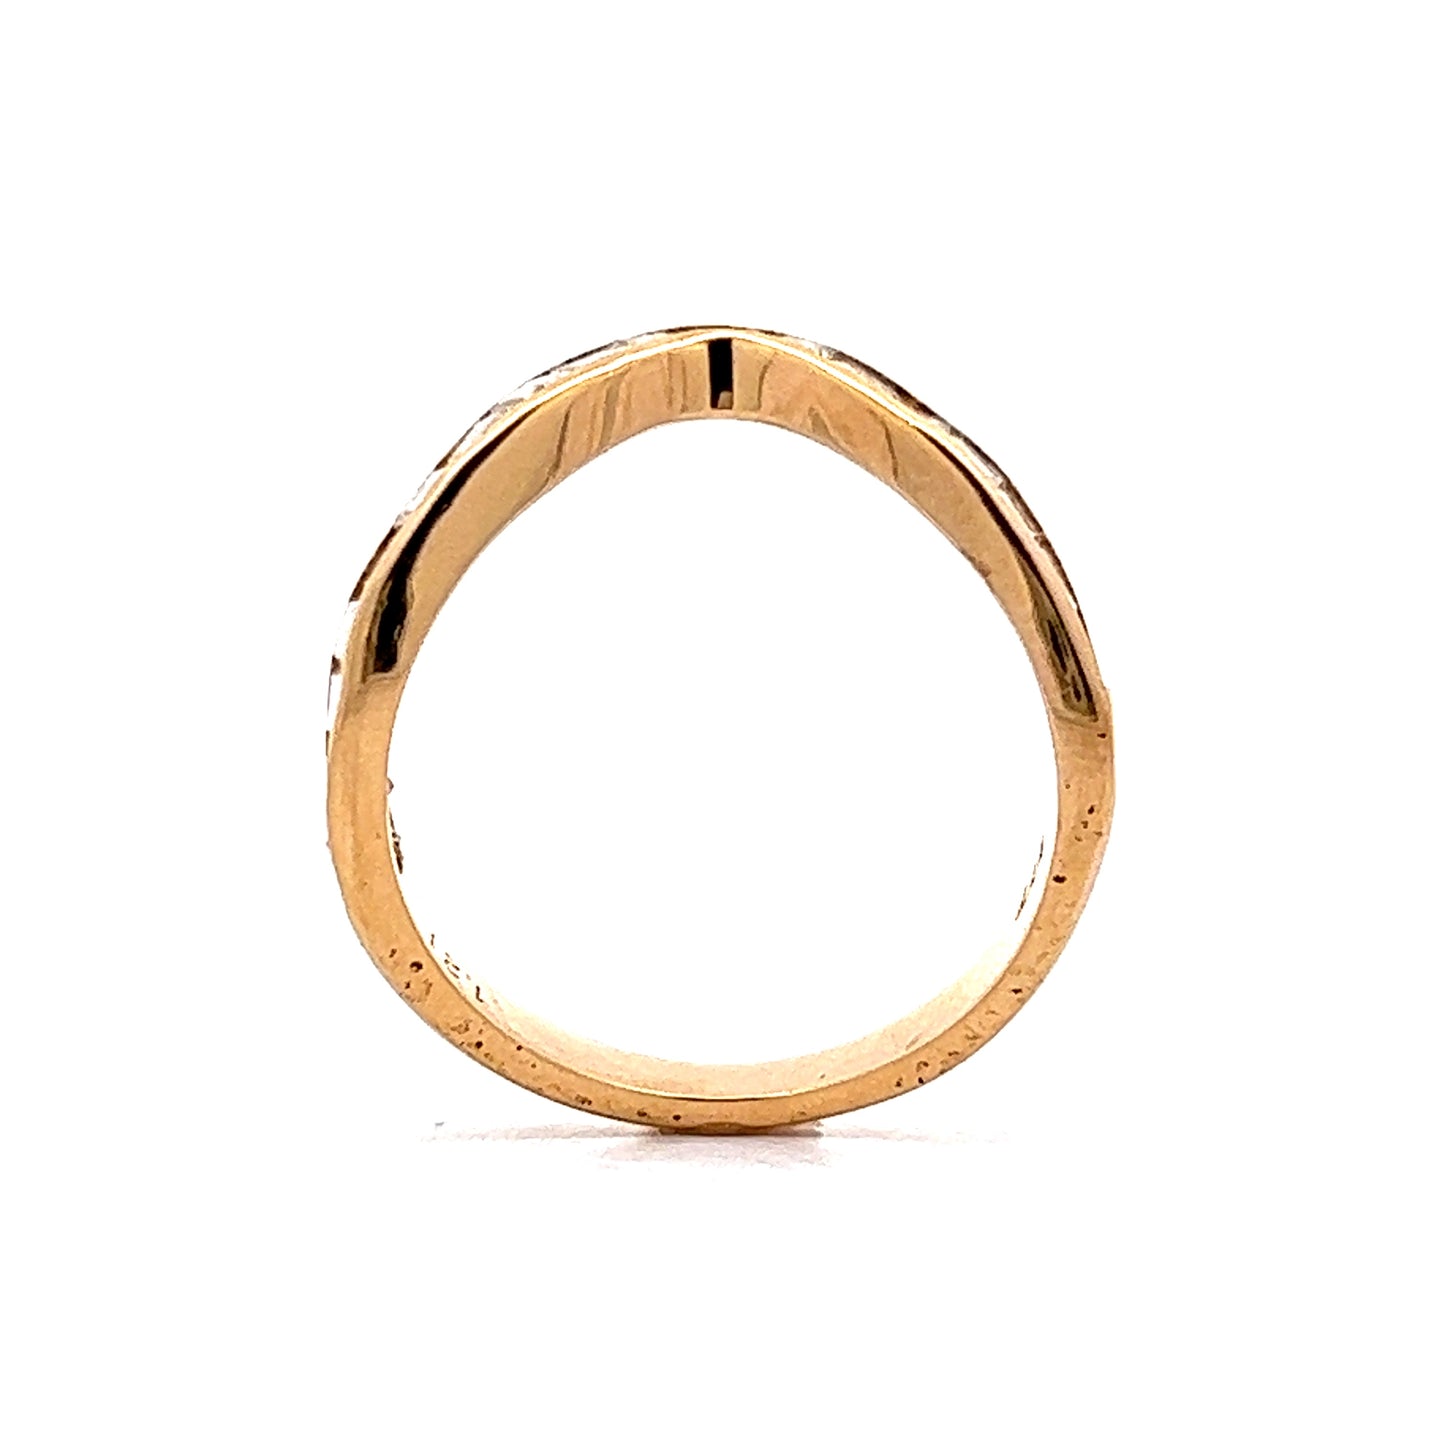 1.08 Baguette Diamond Contoured Wedding Band in 18k Yellow Gold